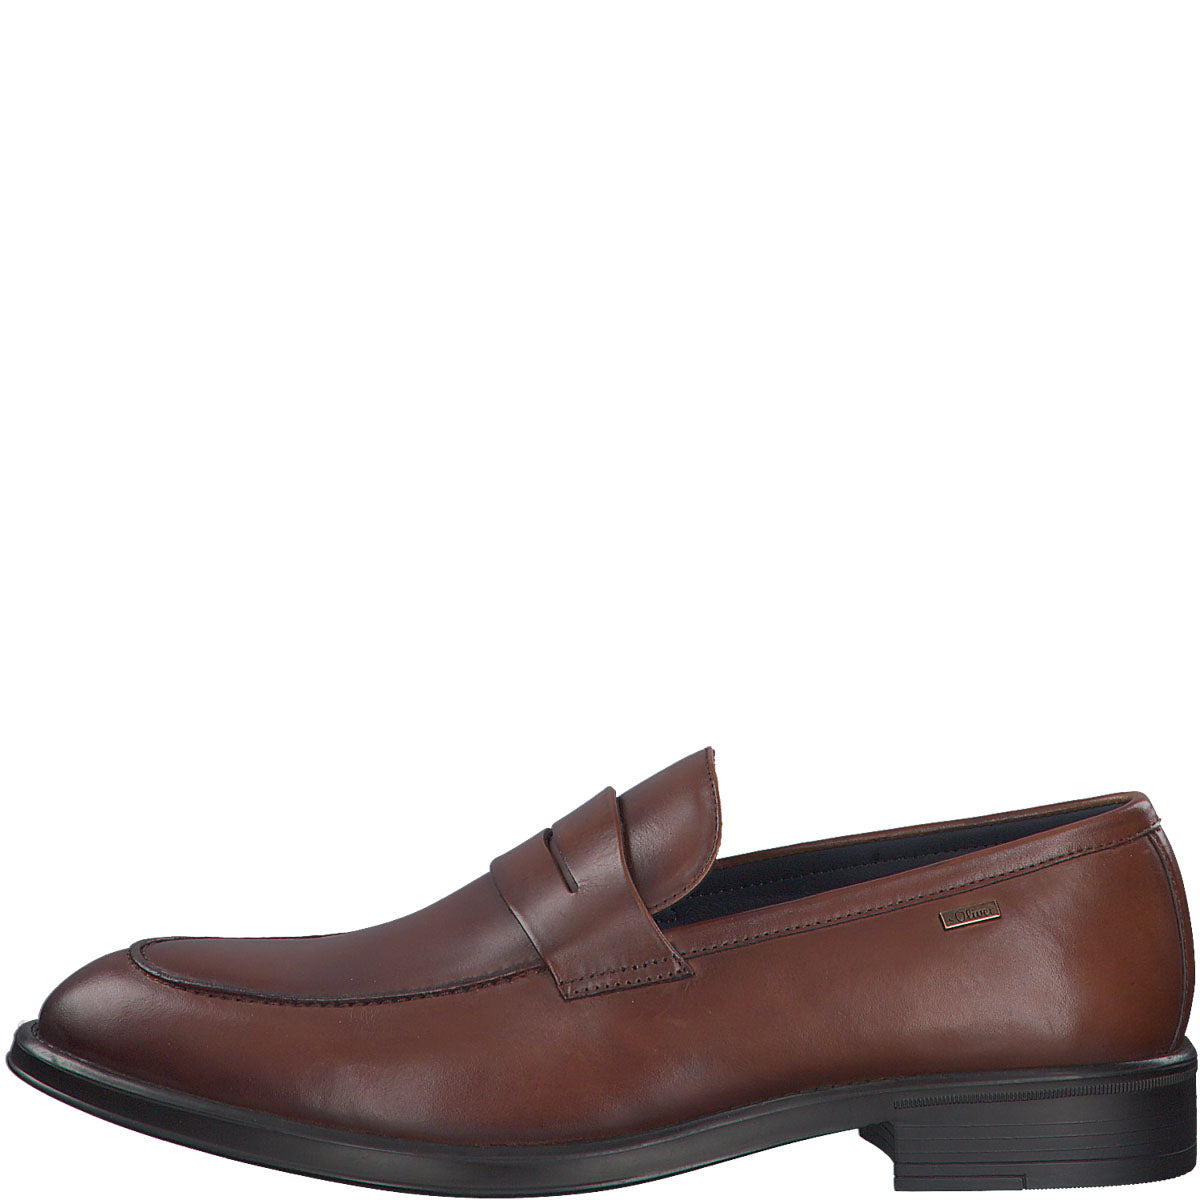 S.Oliver Men's Classic Brown Leather Penny Loafers